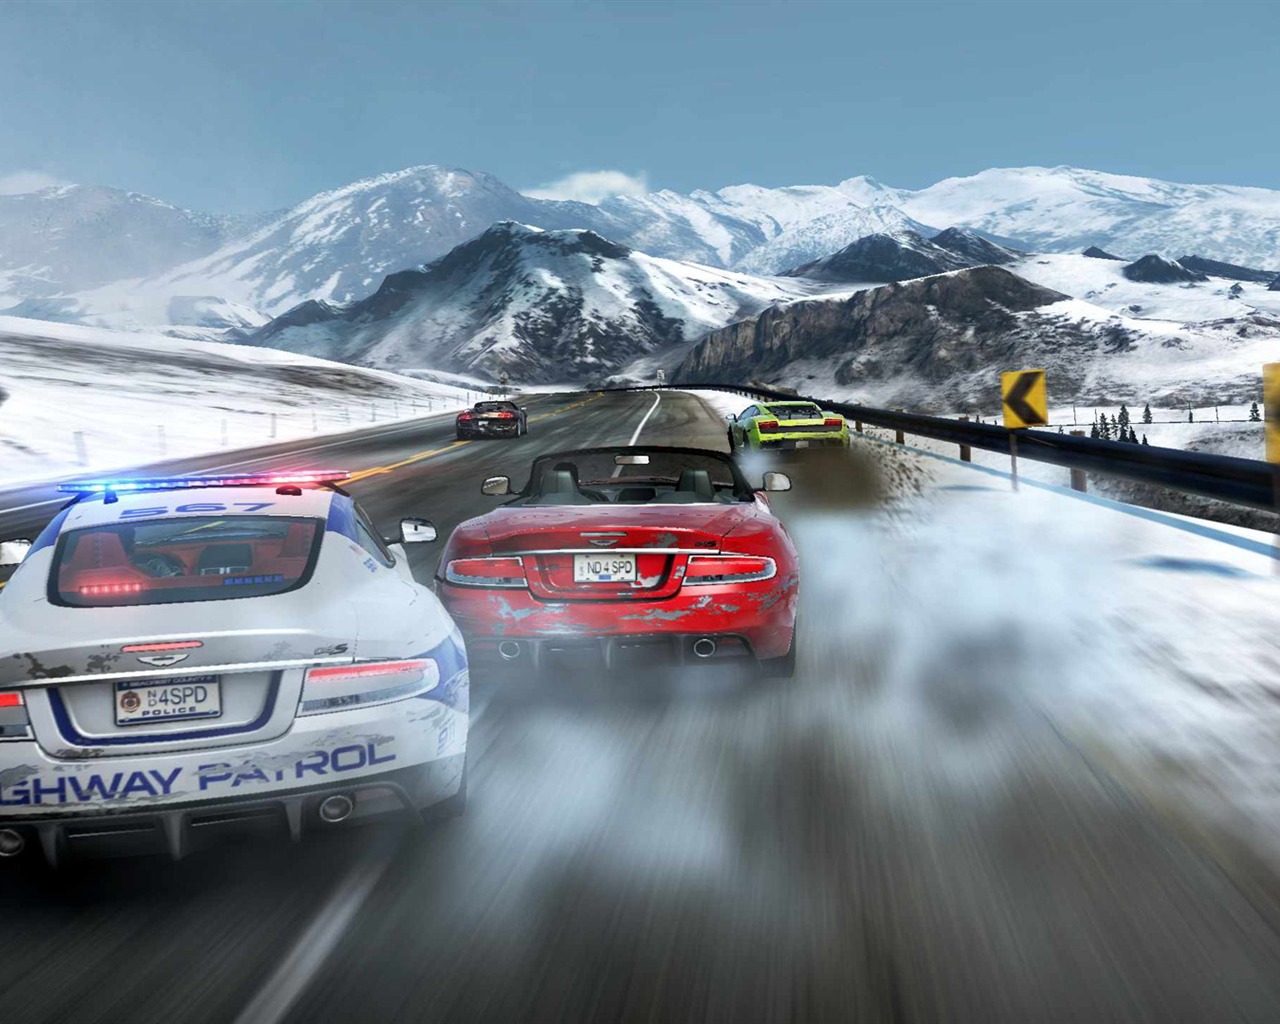 Need for Speed: Hot Pursuit 極品飛車14：熱力追踪 #5 - 1280x1024